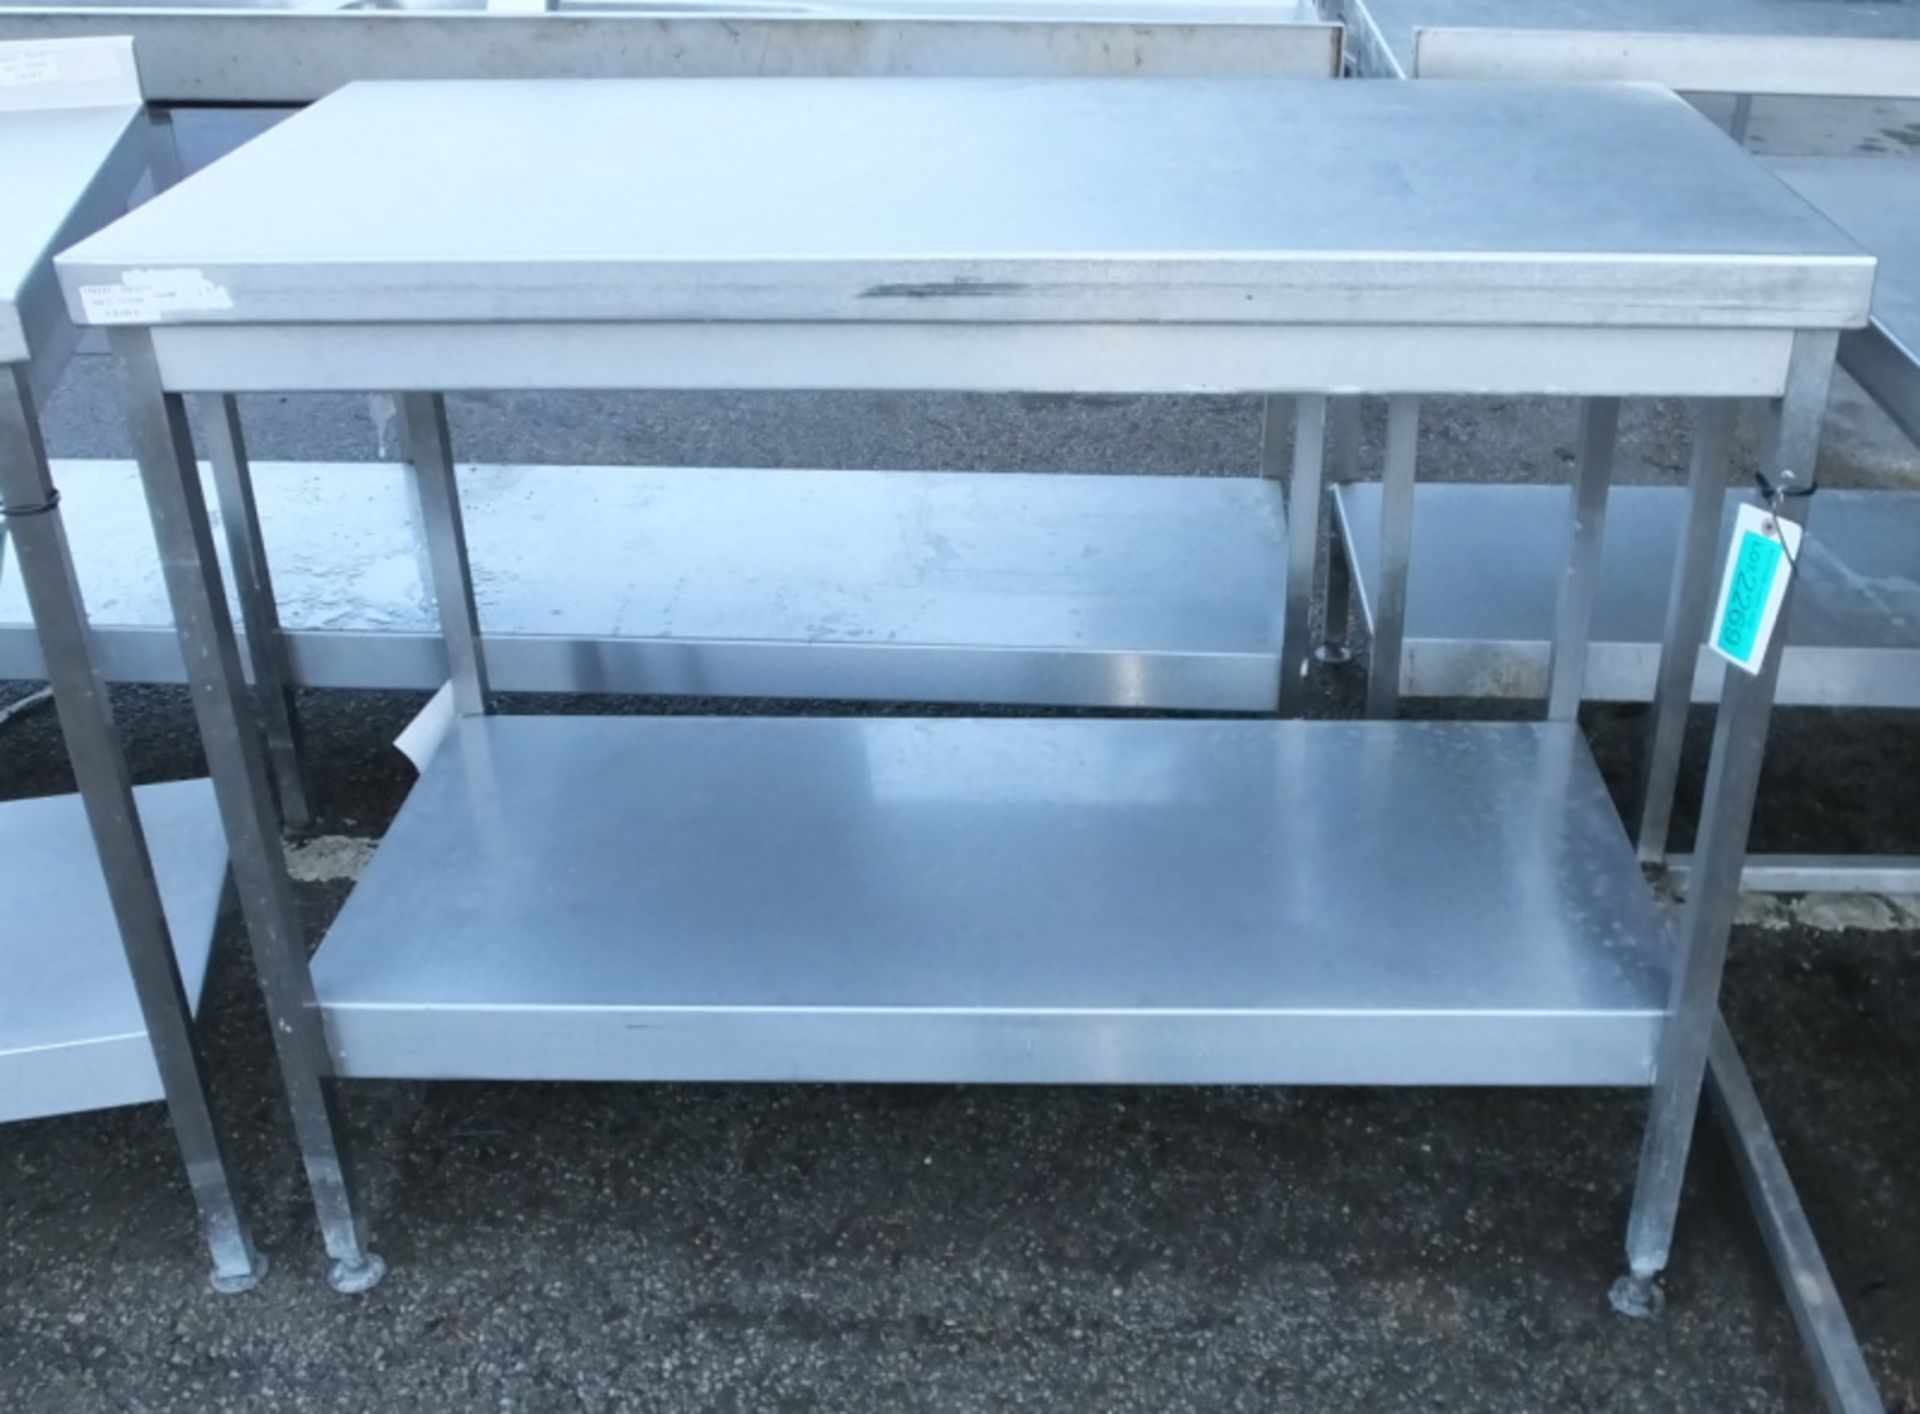 Stainless Steel Counter Work Top L 1200mm x W 600mm x H 920mm